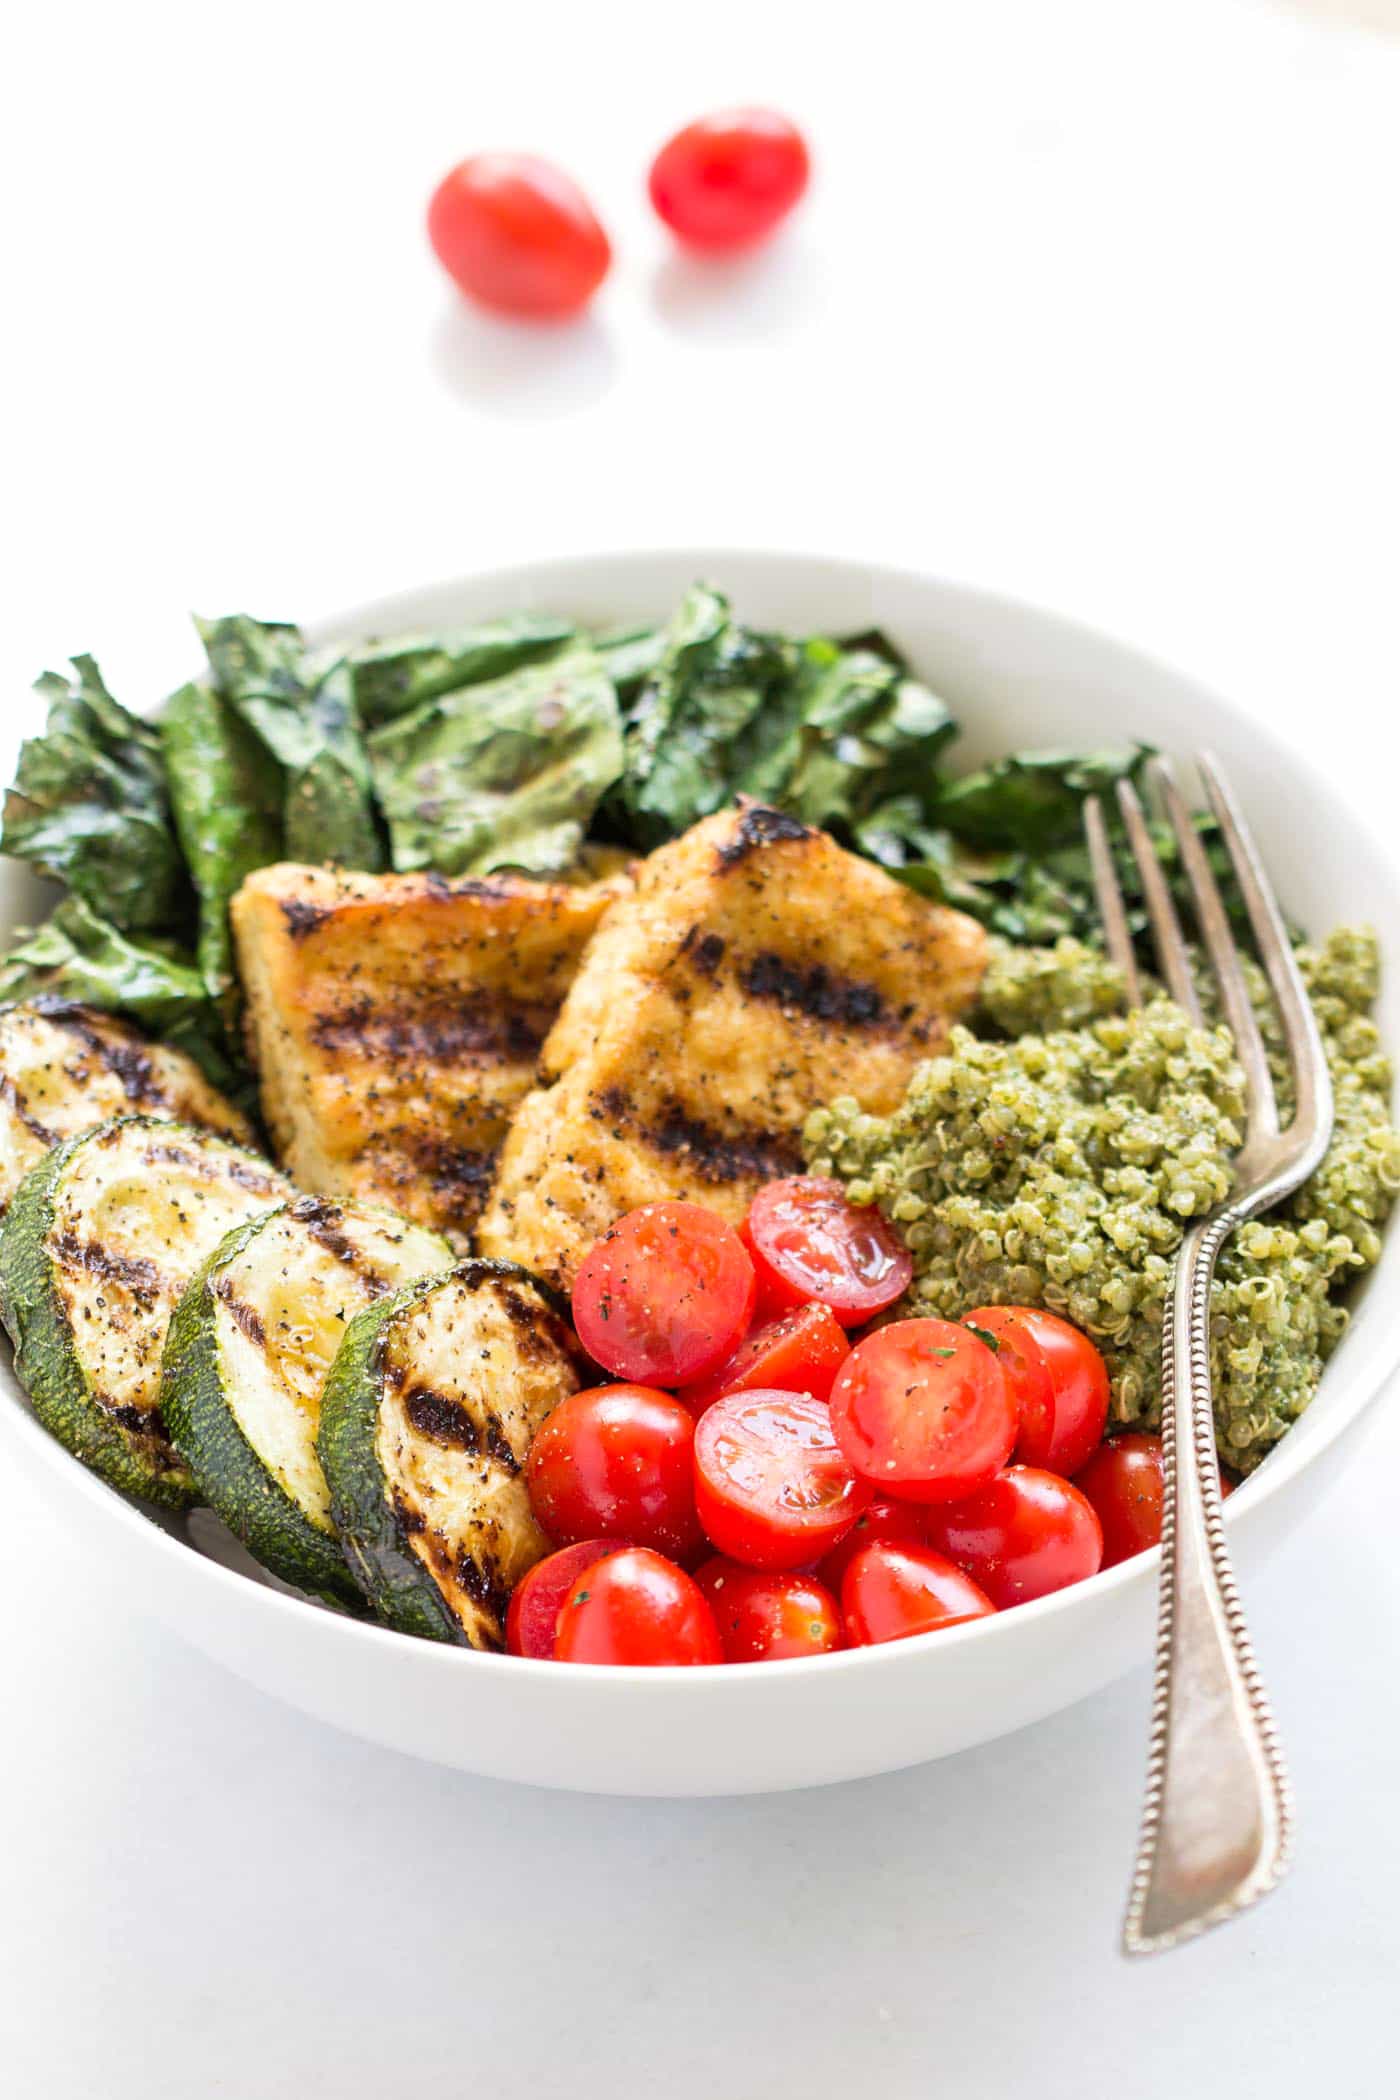 These simple pesto quinoa bowls are amazing! Topped with grilled veggies, tofu and chopped cherry tomatoes!